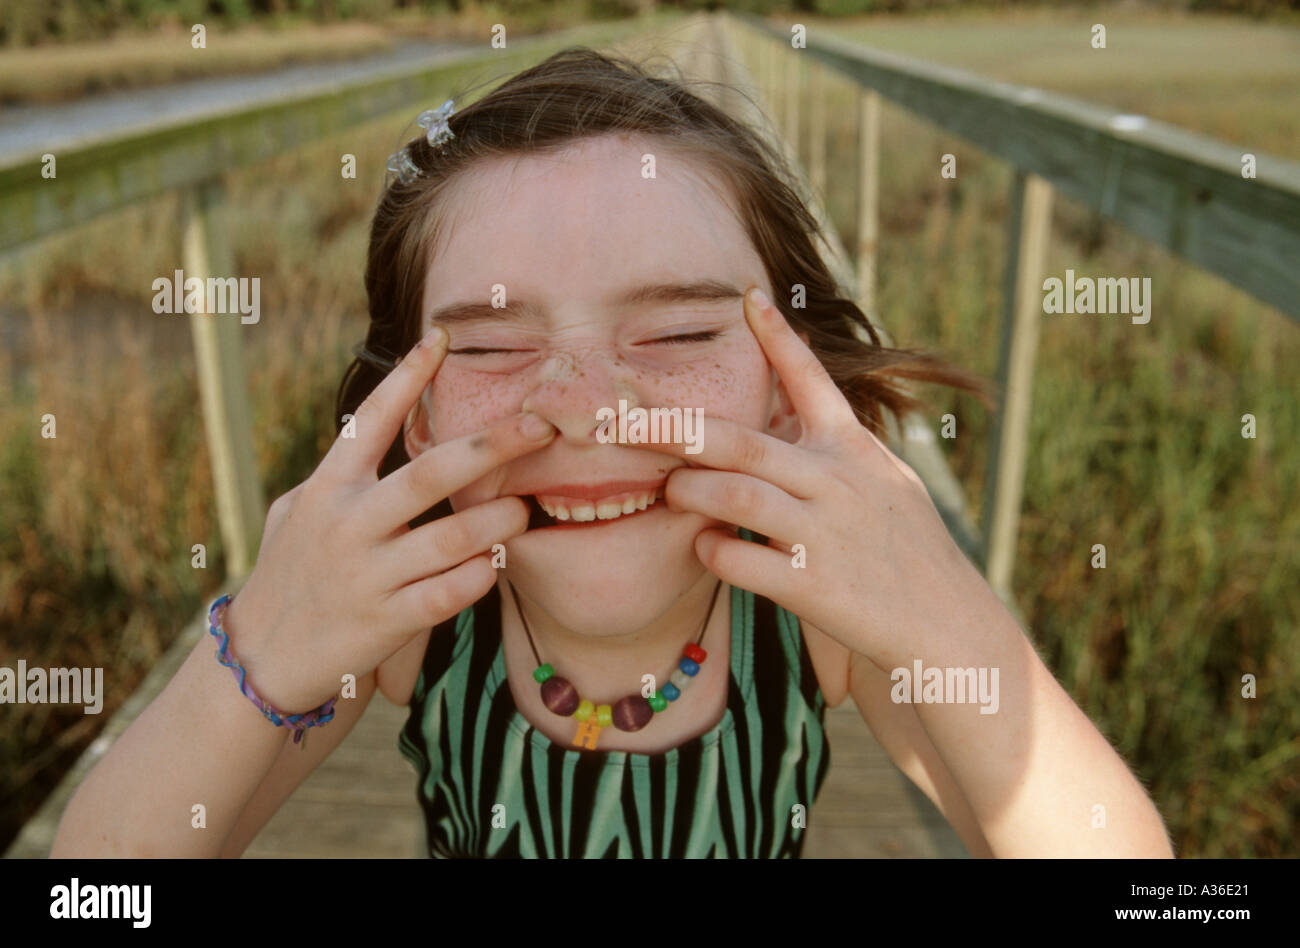 A young girl standing on a boardwalk is looking up at the viewer making a silly goofy face with the help of her fingers Stock Photo